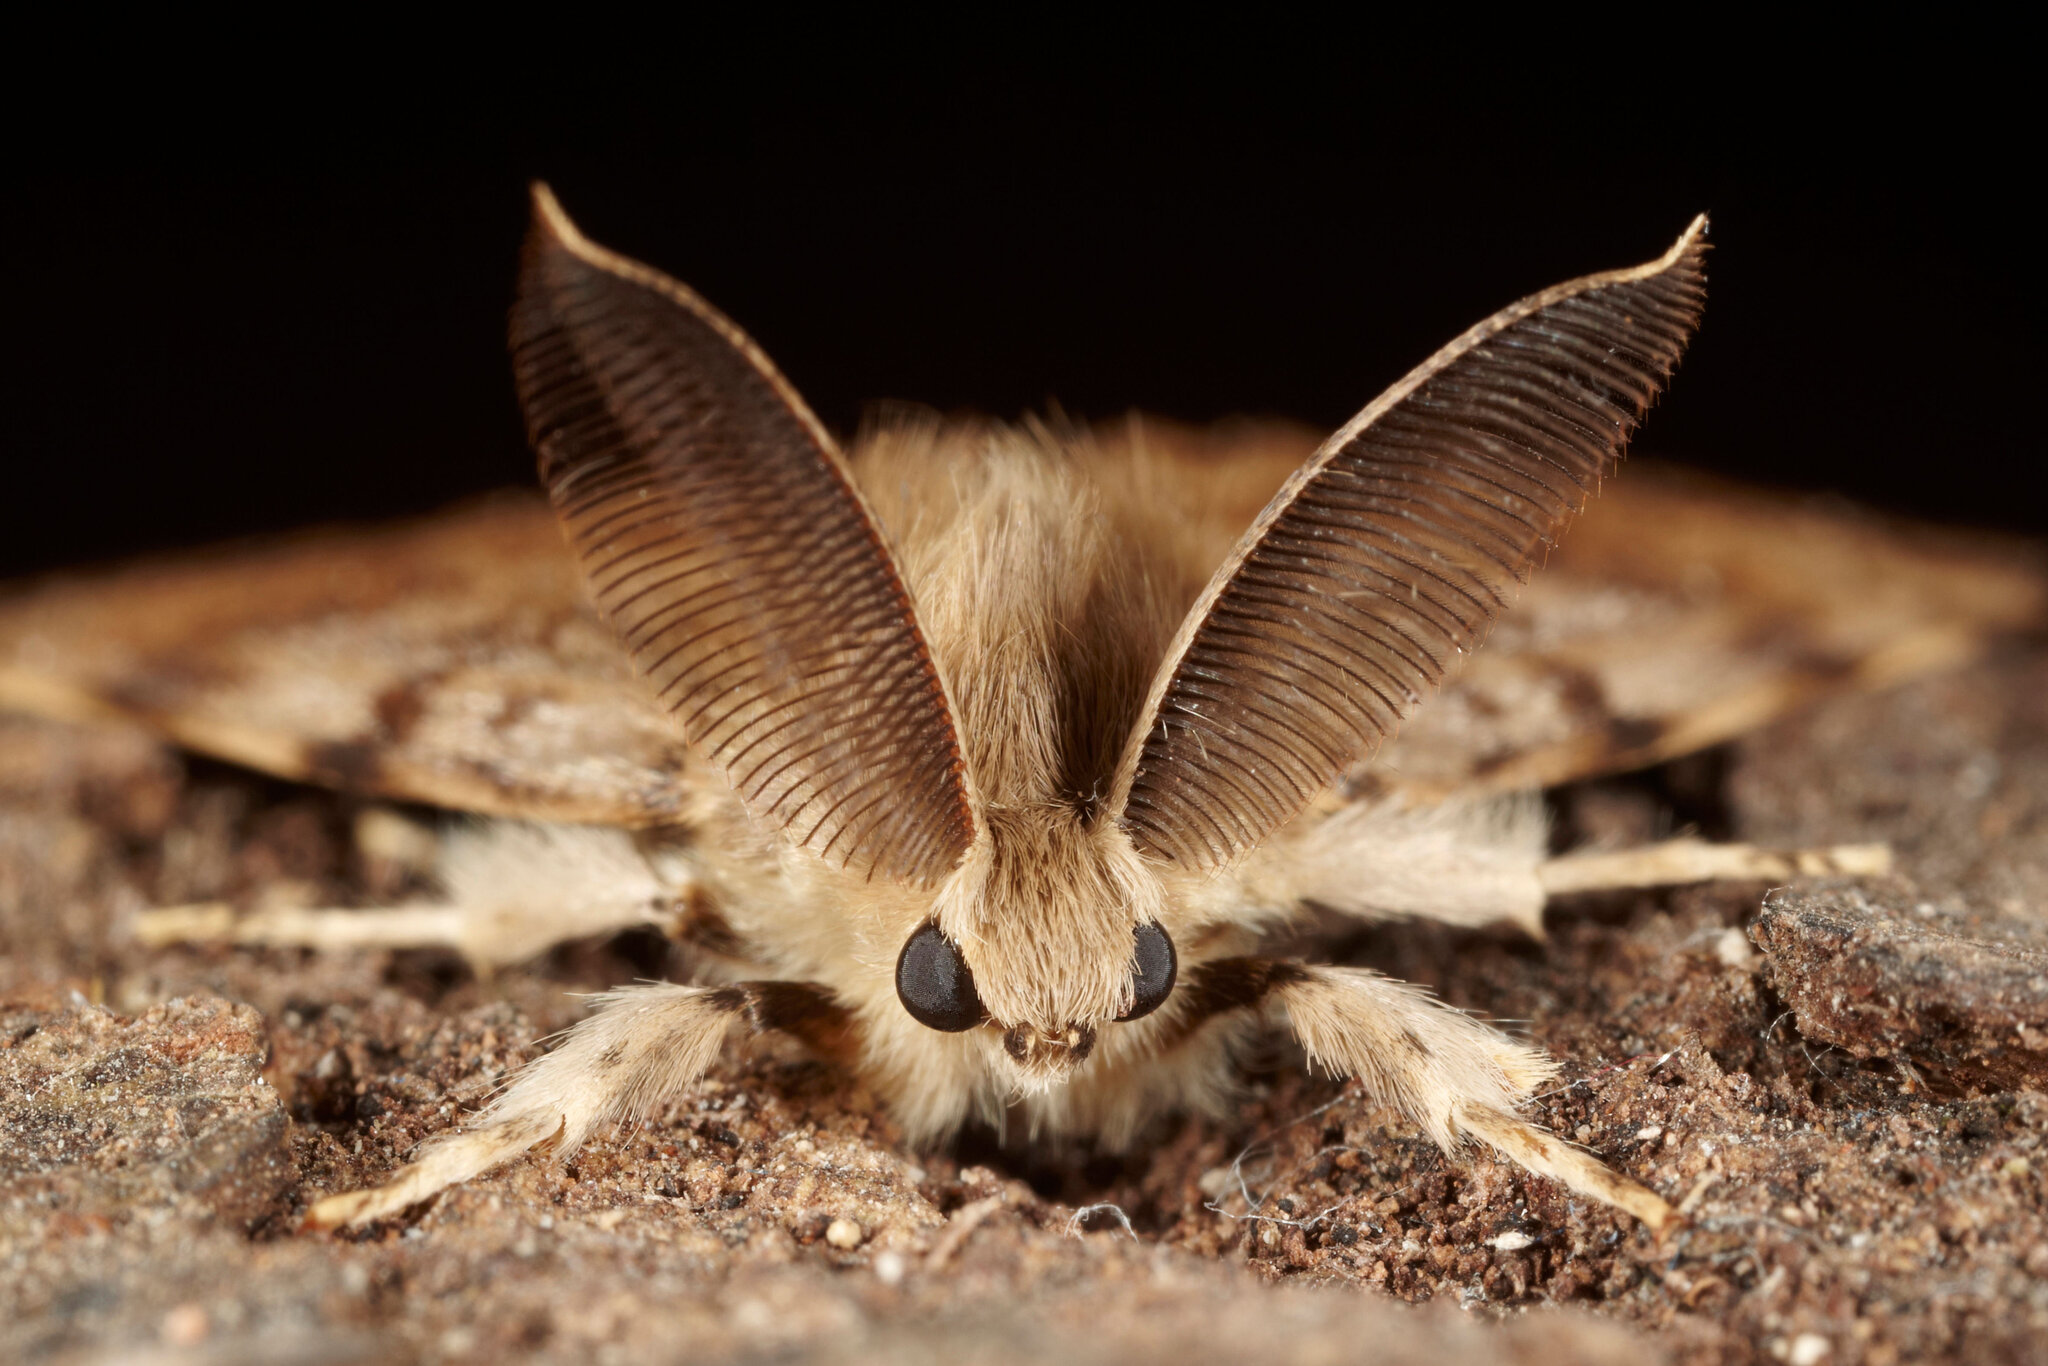 Scientists, not insects, want the new name for the spongy moth to spread